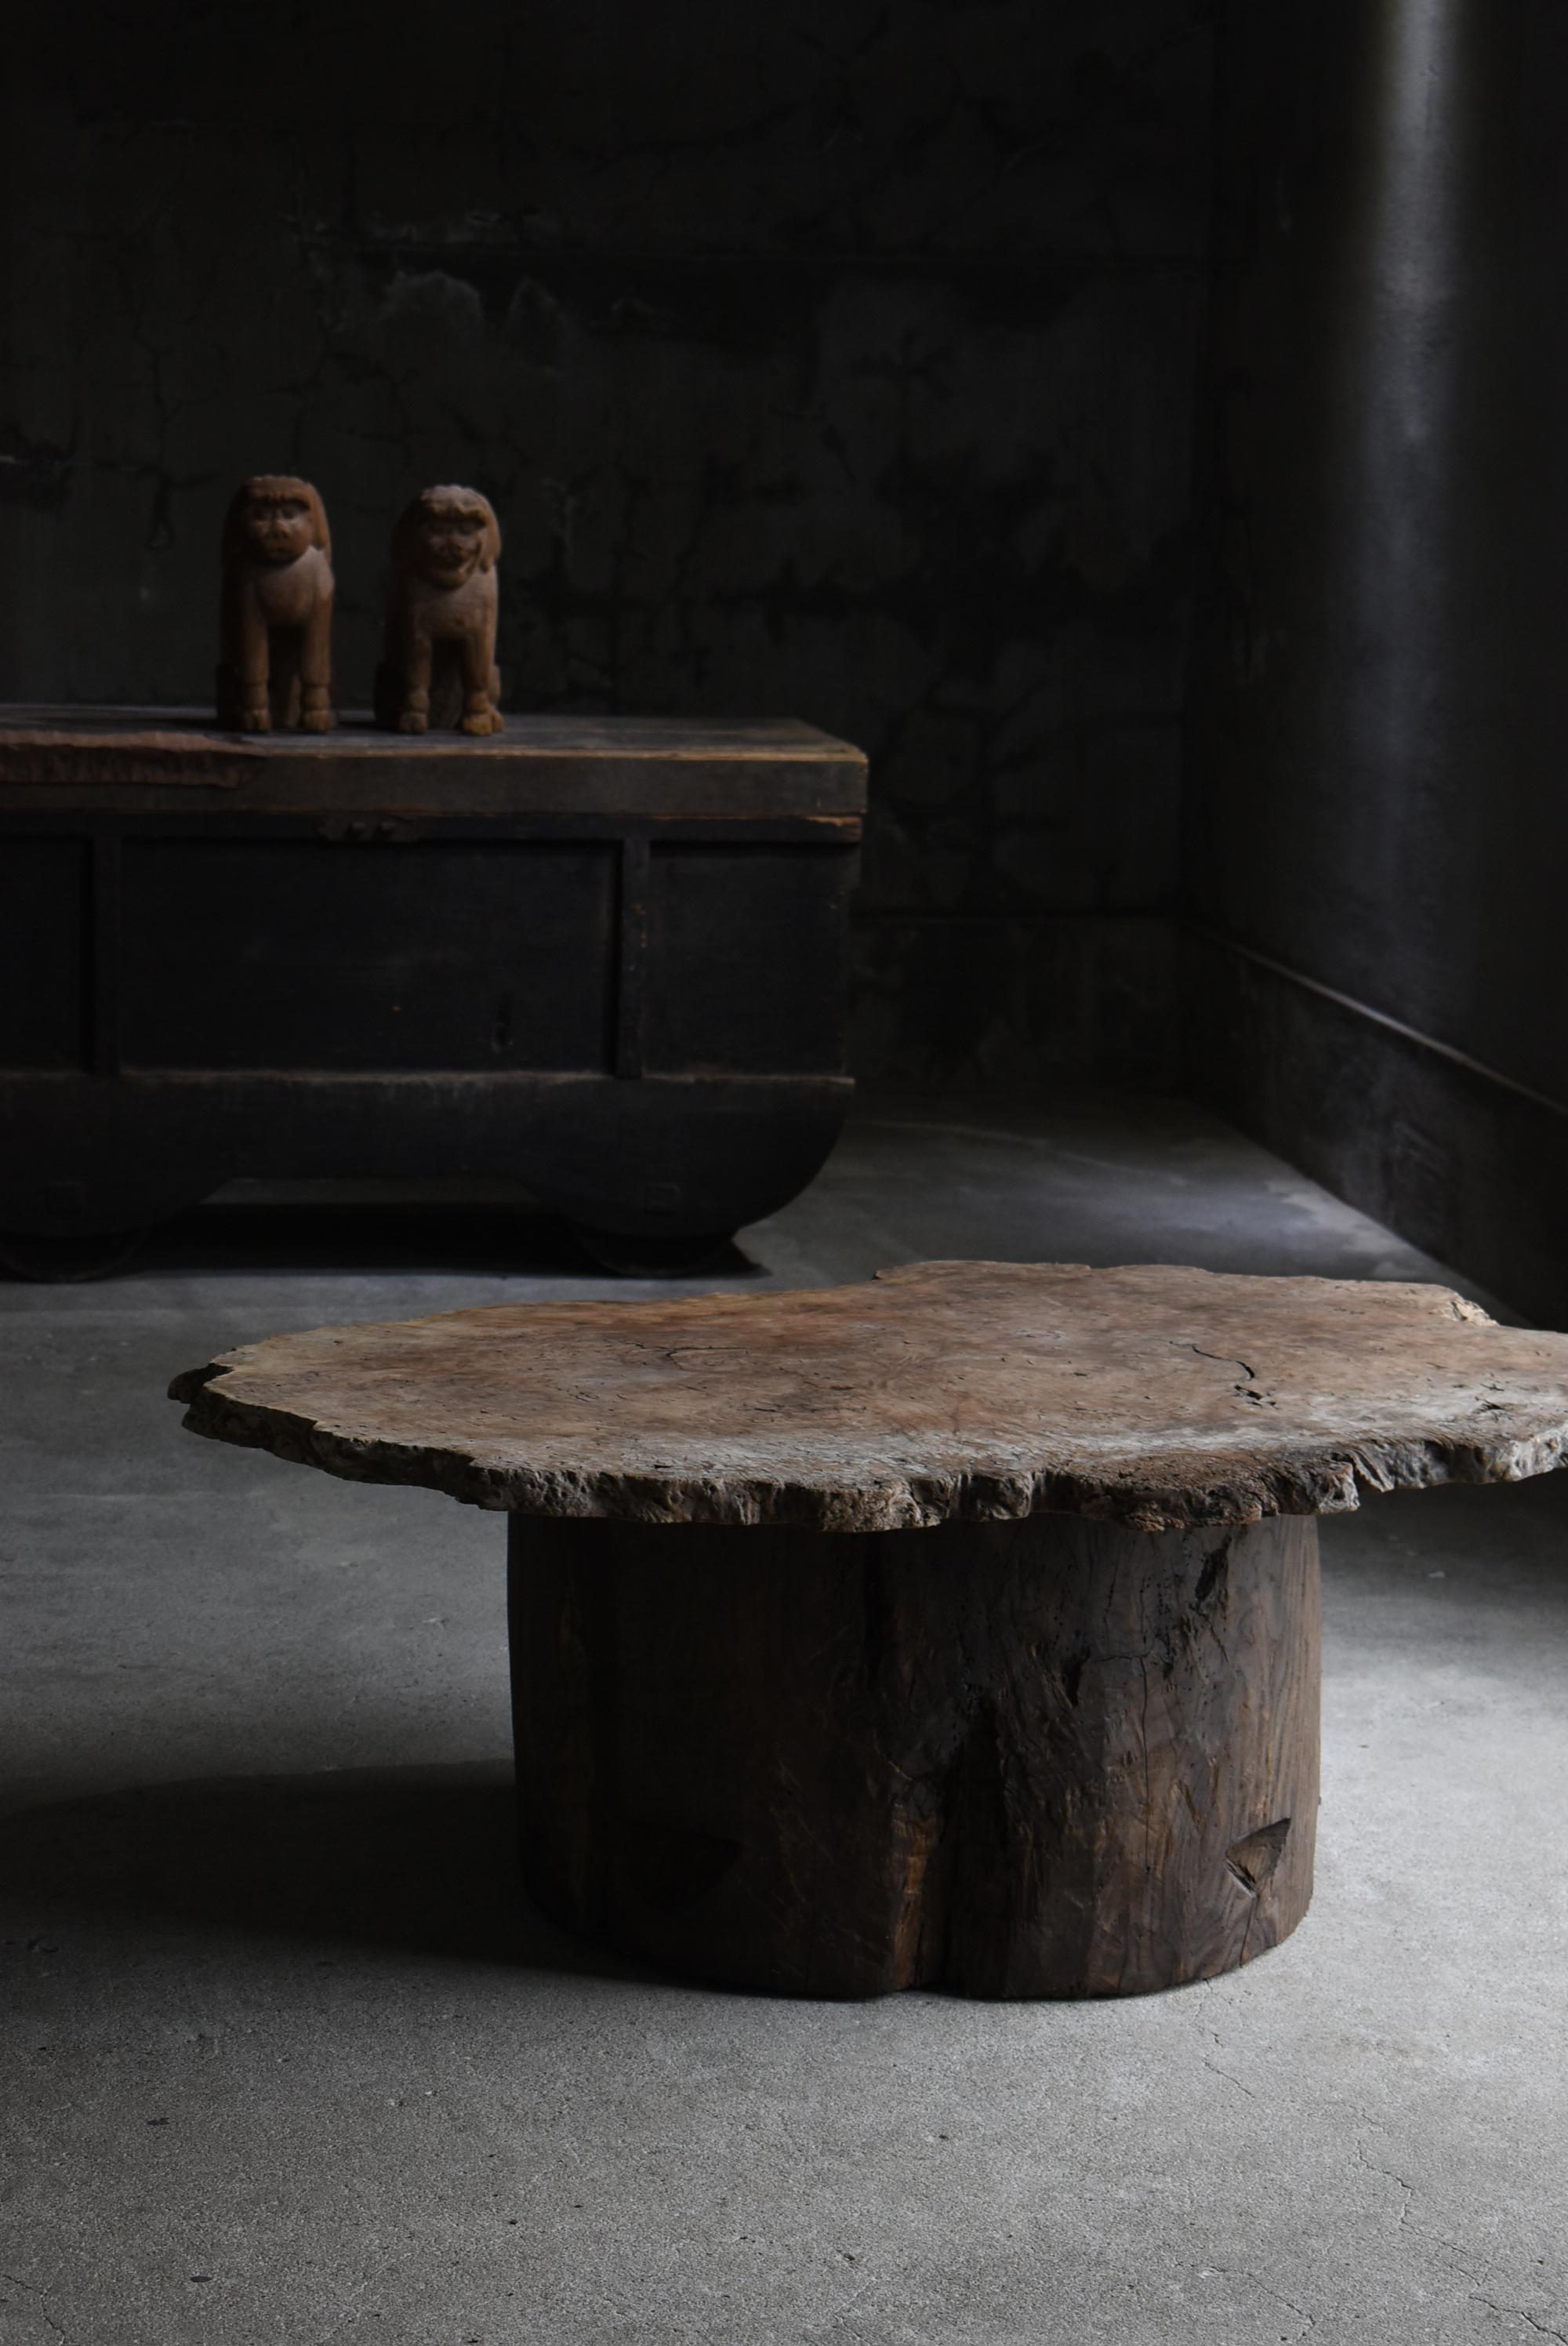 Very old Japanese primitive style table.
Simple design with a single board on a stump.
The furniture is from the Meiji period (1860s-1900s).

The single board is made of zelkova.
The stump is chestnut wood.
Each material itself is very unique and